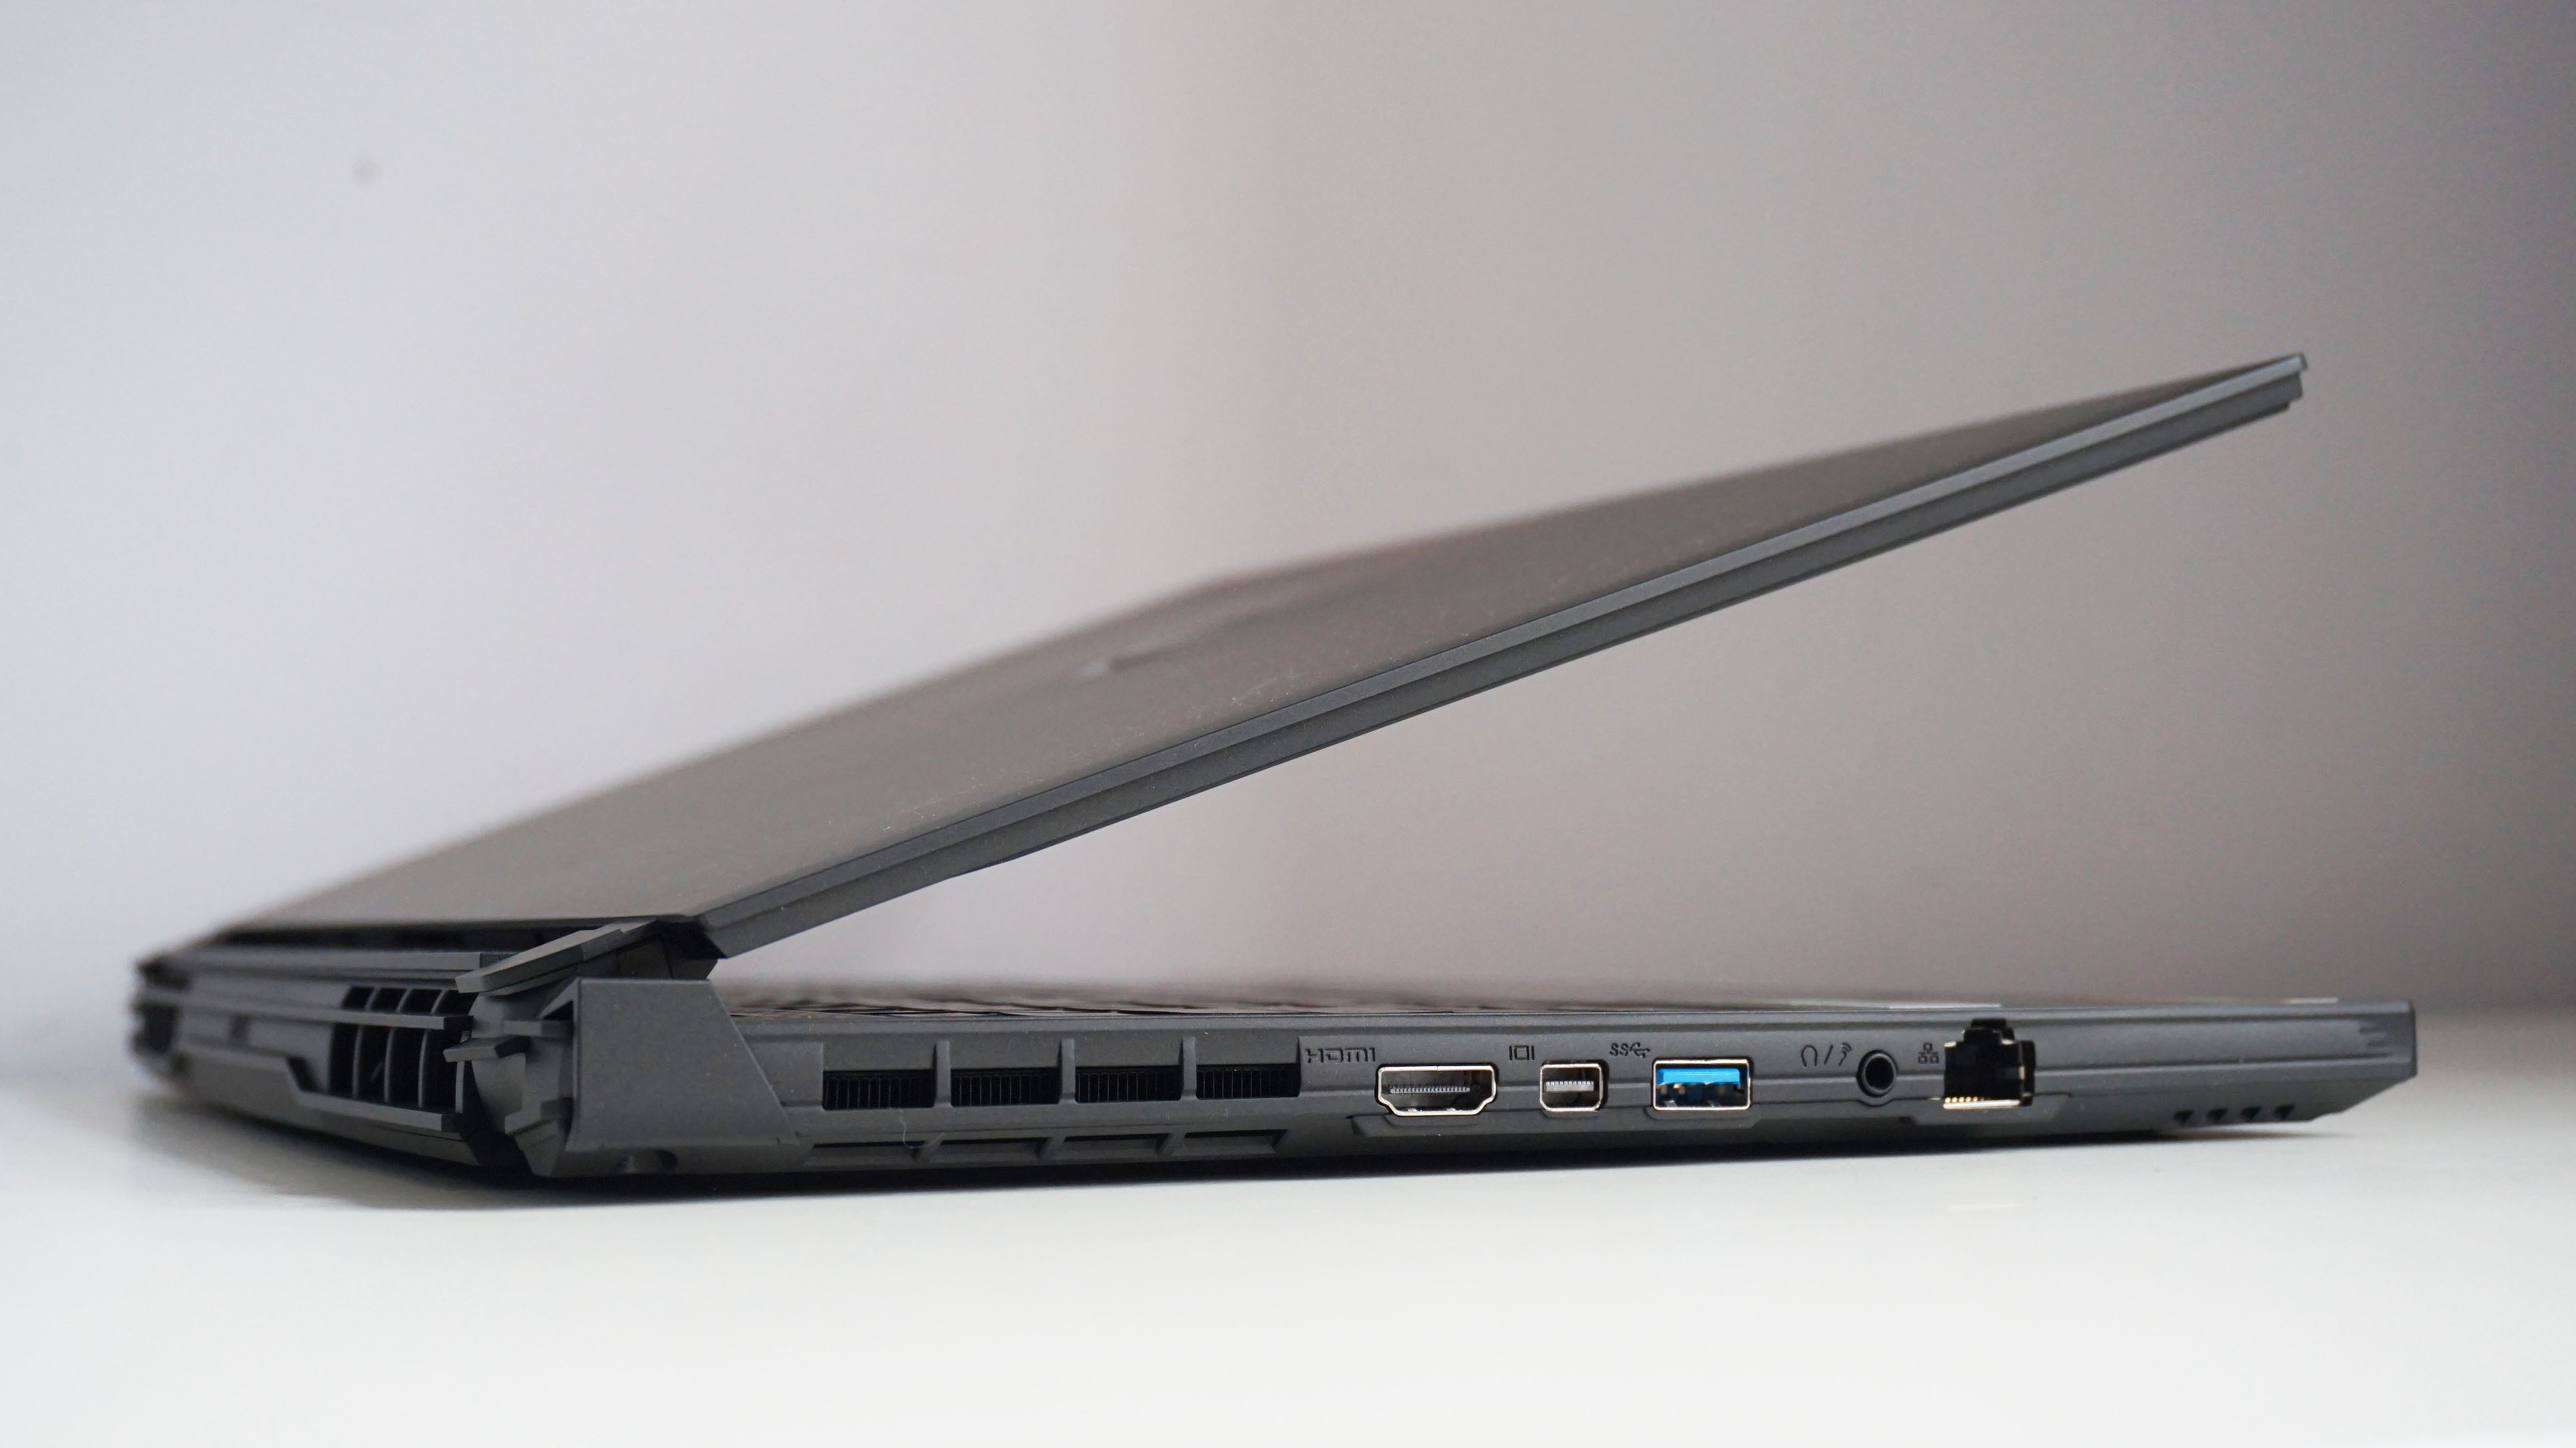 A photo of the Gigabyte Aorus 15G gaming laptop from the side